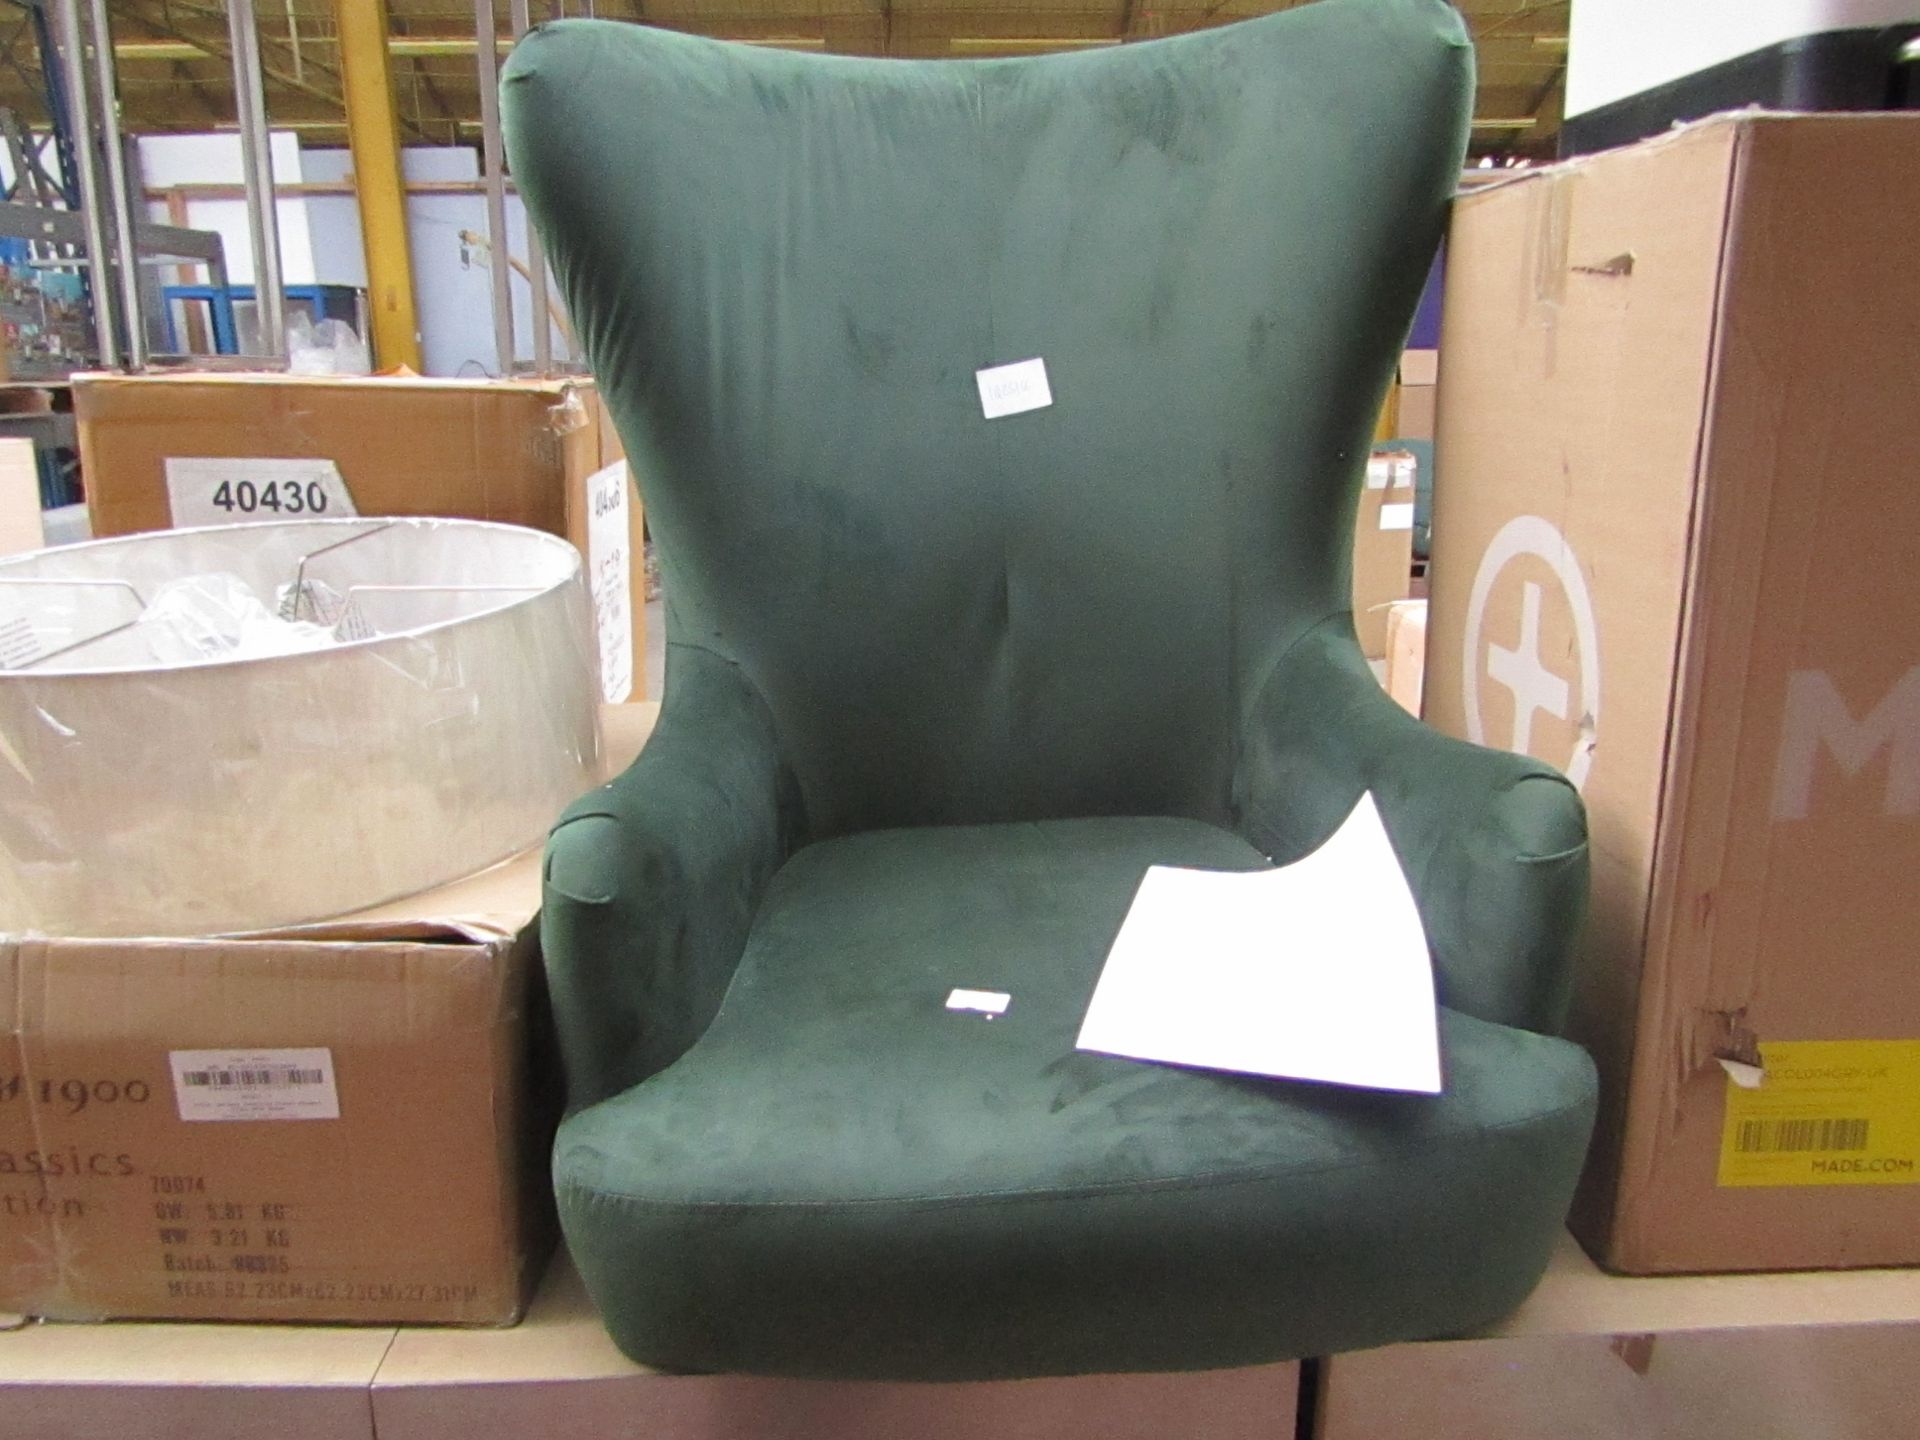 | 1X | MADE.COM BODIL ACCENT ARMCHAIR, BOTTLE GREEN VELVET WITH DARK WOOD LEGS | PLEASE NOTE NO FEET